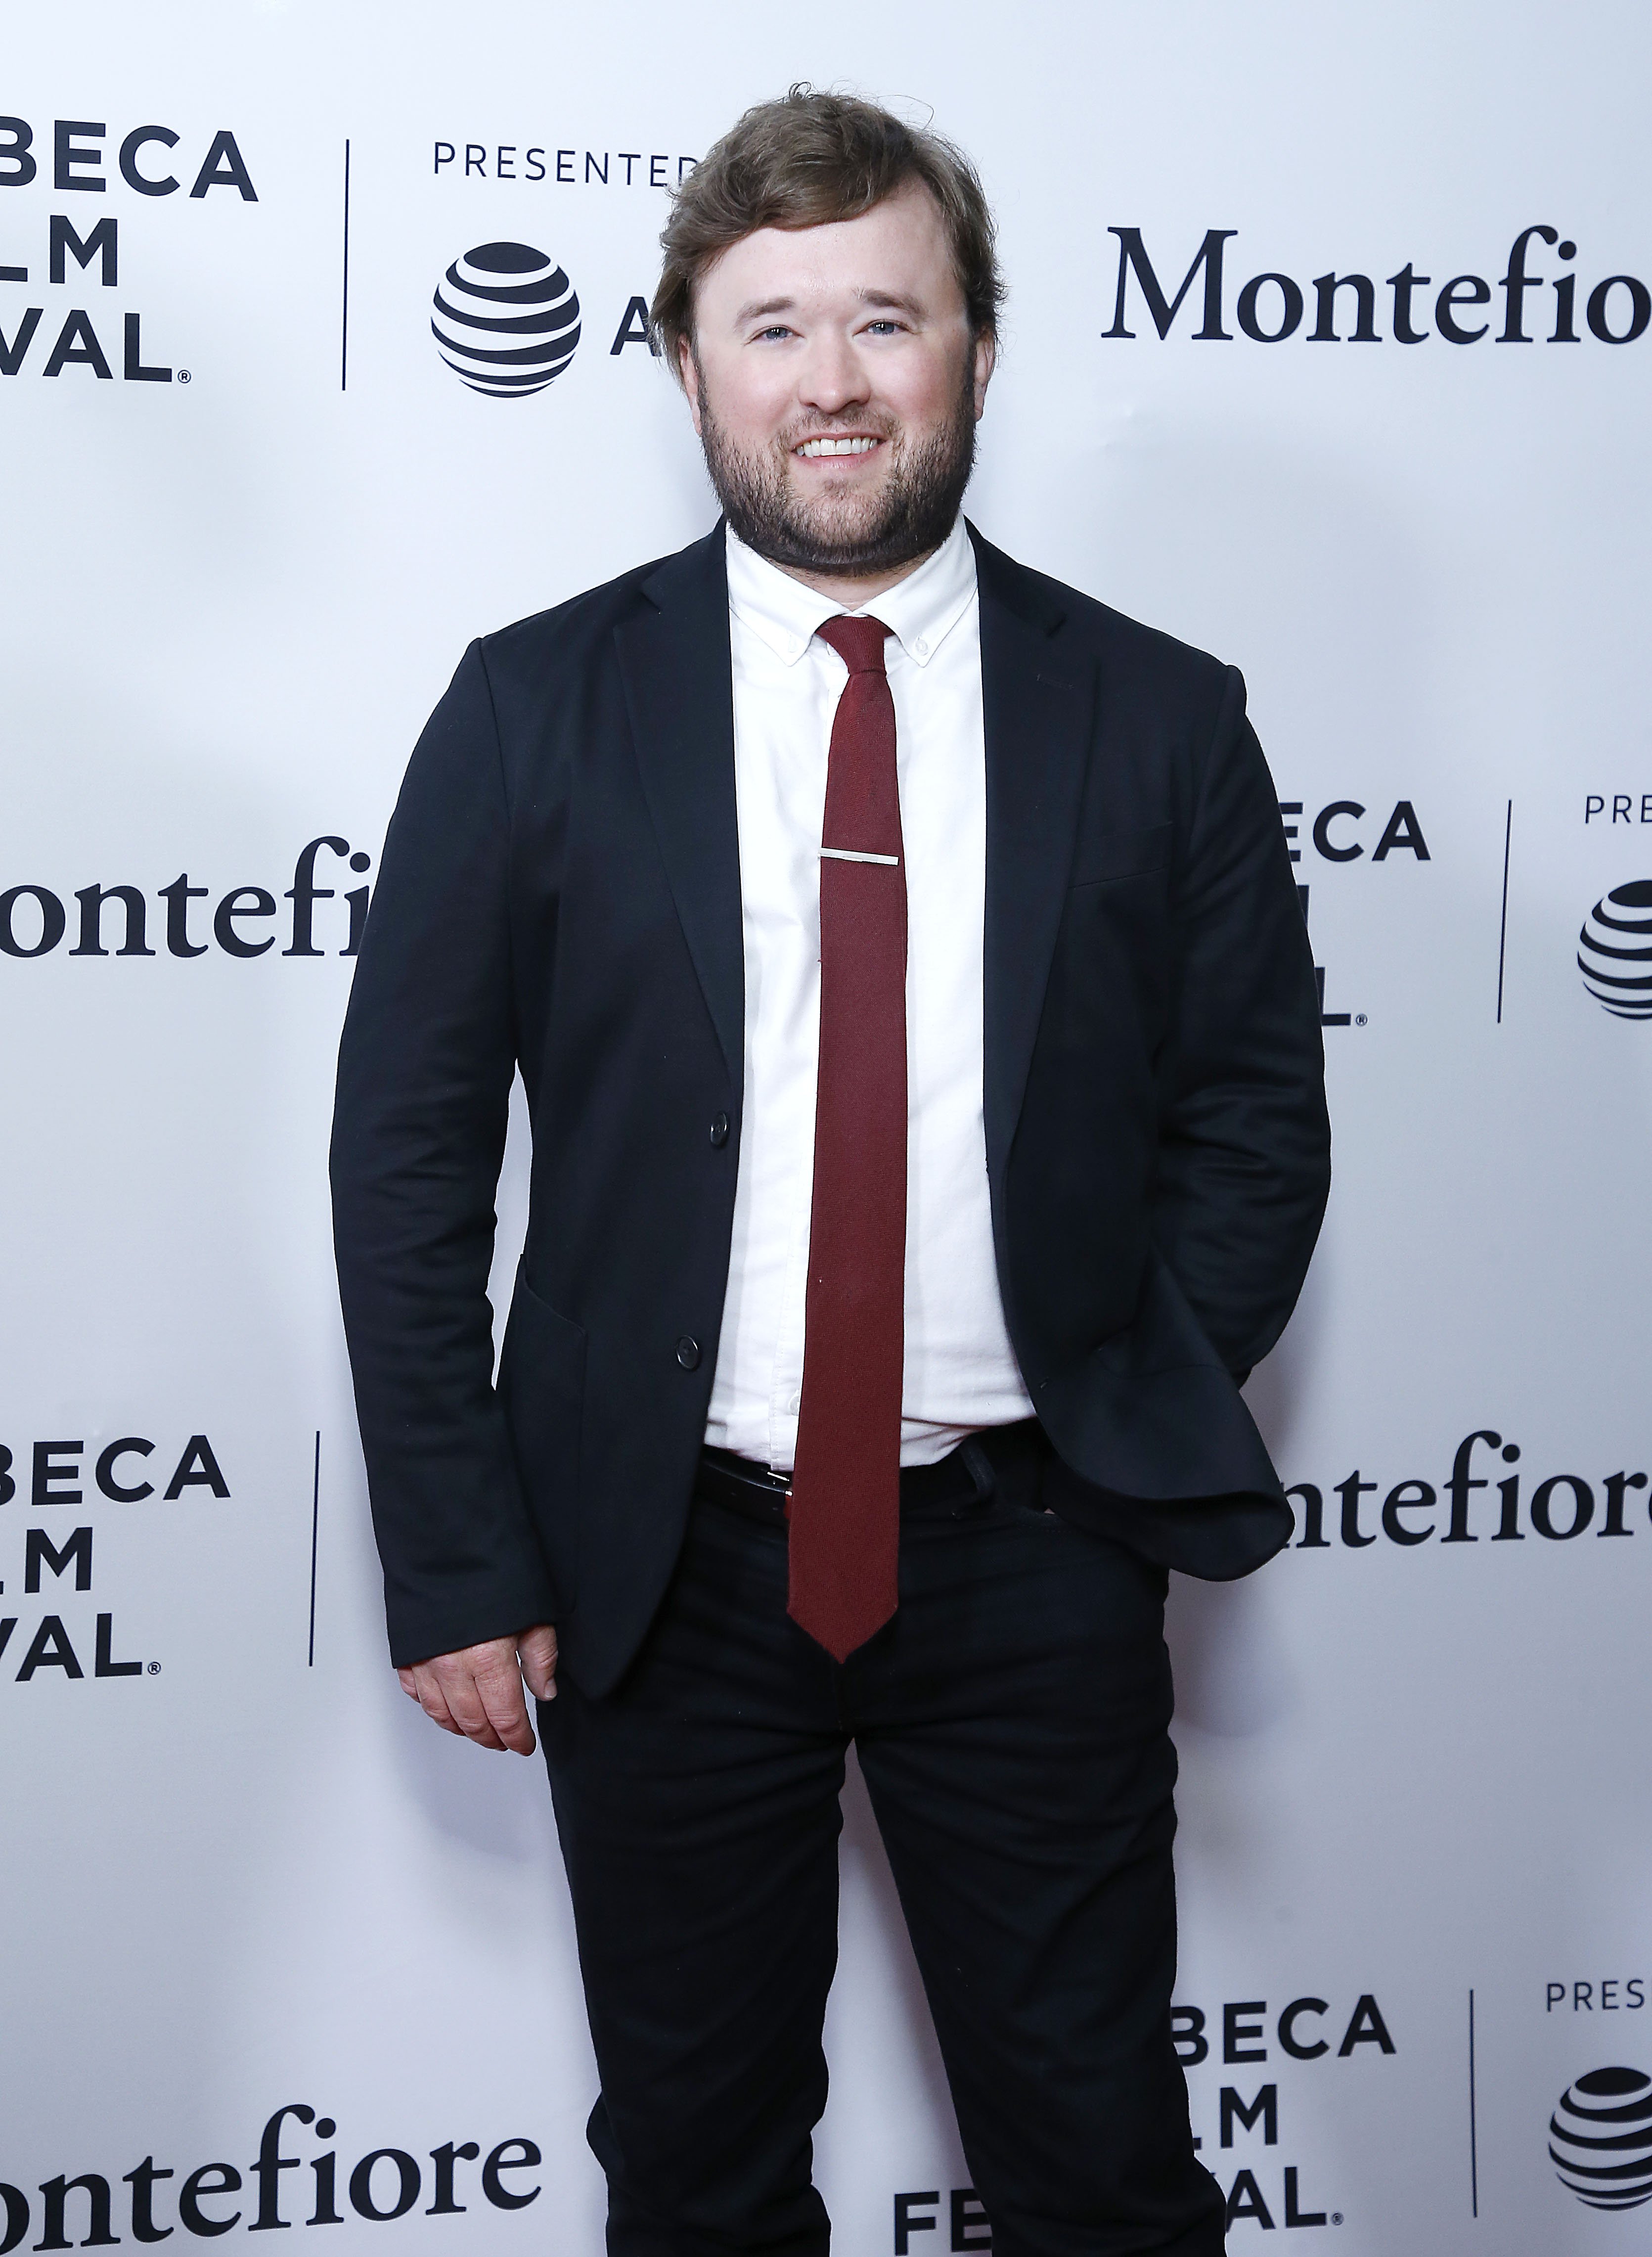 Haley Joel Osment besucht das Tribeca Film Festival 2019 - "Tribeca TV: The Boys" im SVA Theater am 29. April 2019 in New York City. | Quelle: Getty Images